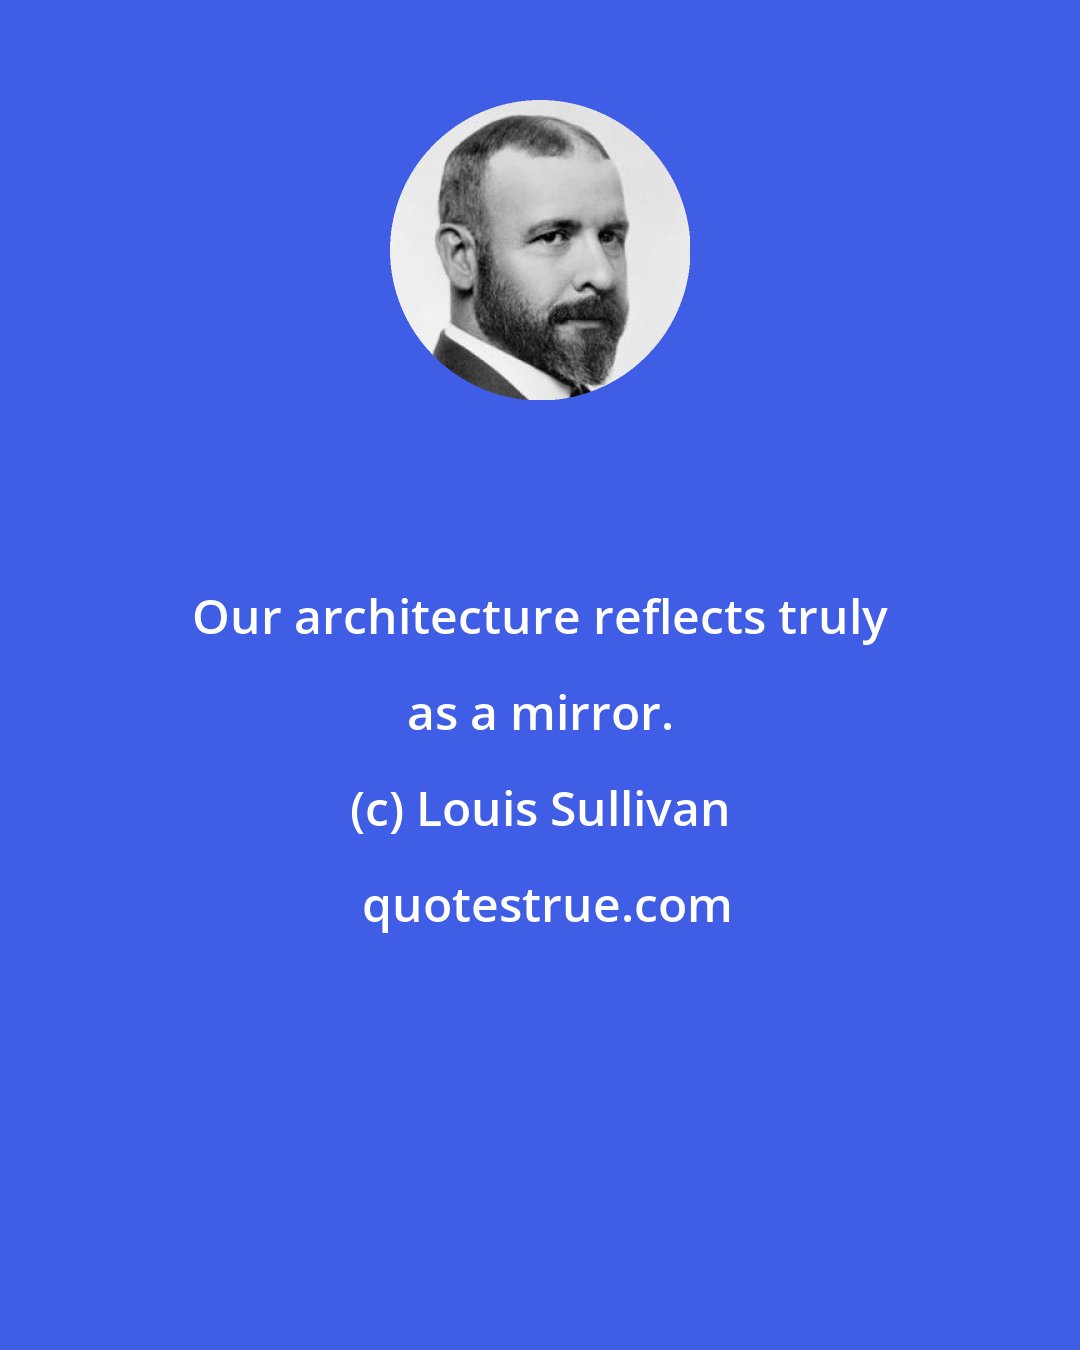 Louis Sullivan: Our architecture reflects truly as a mirror.